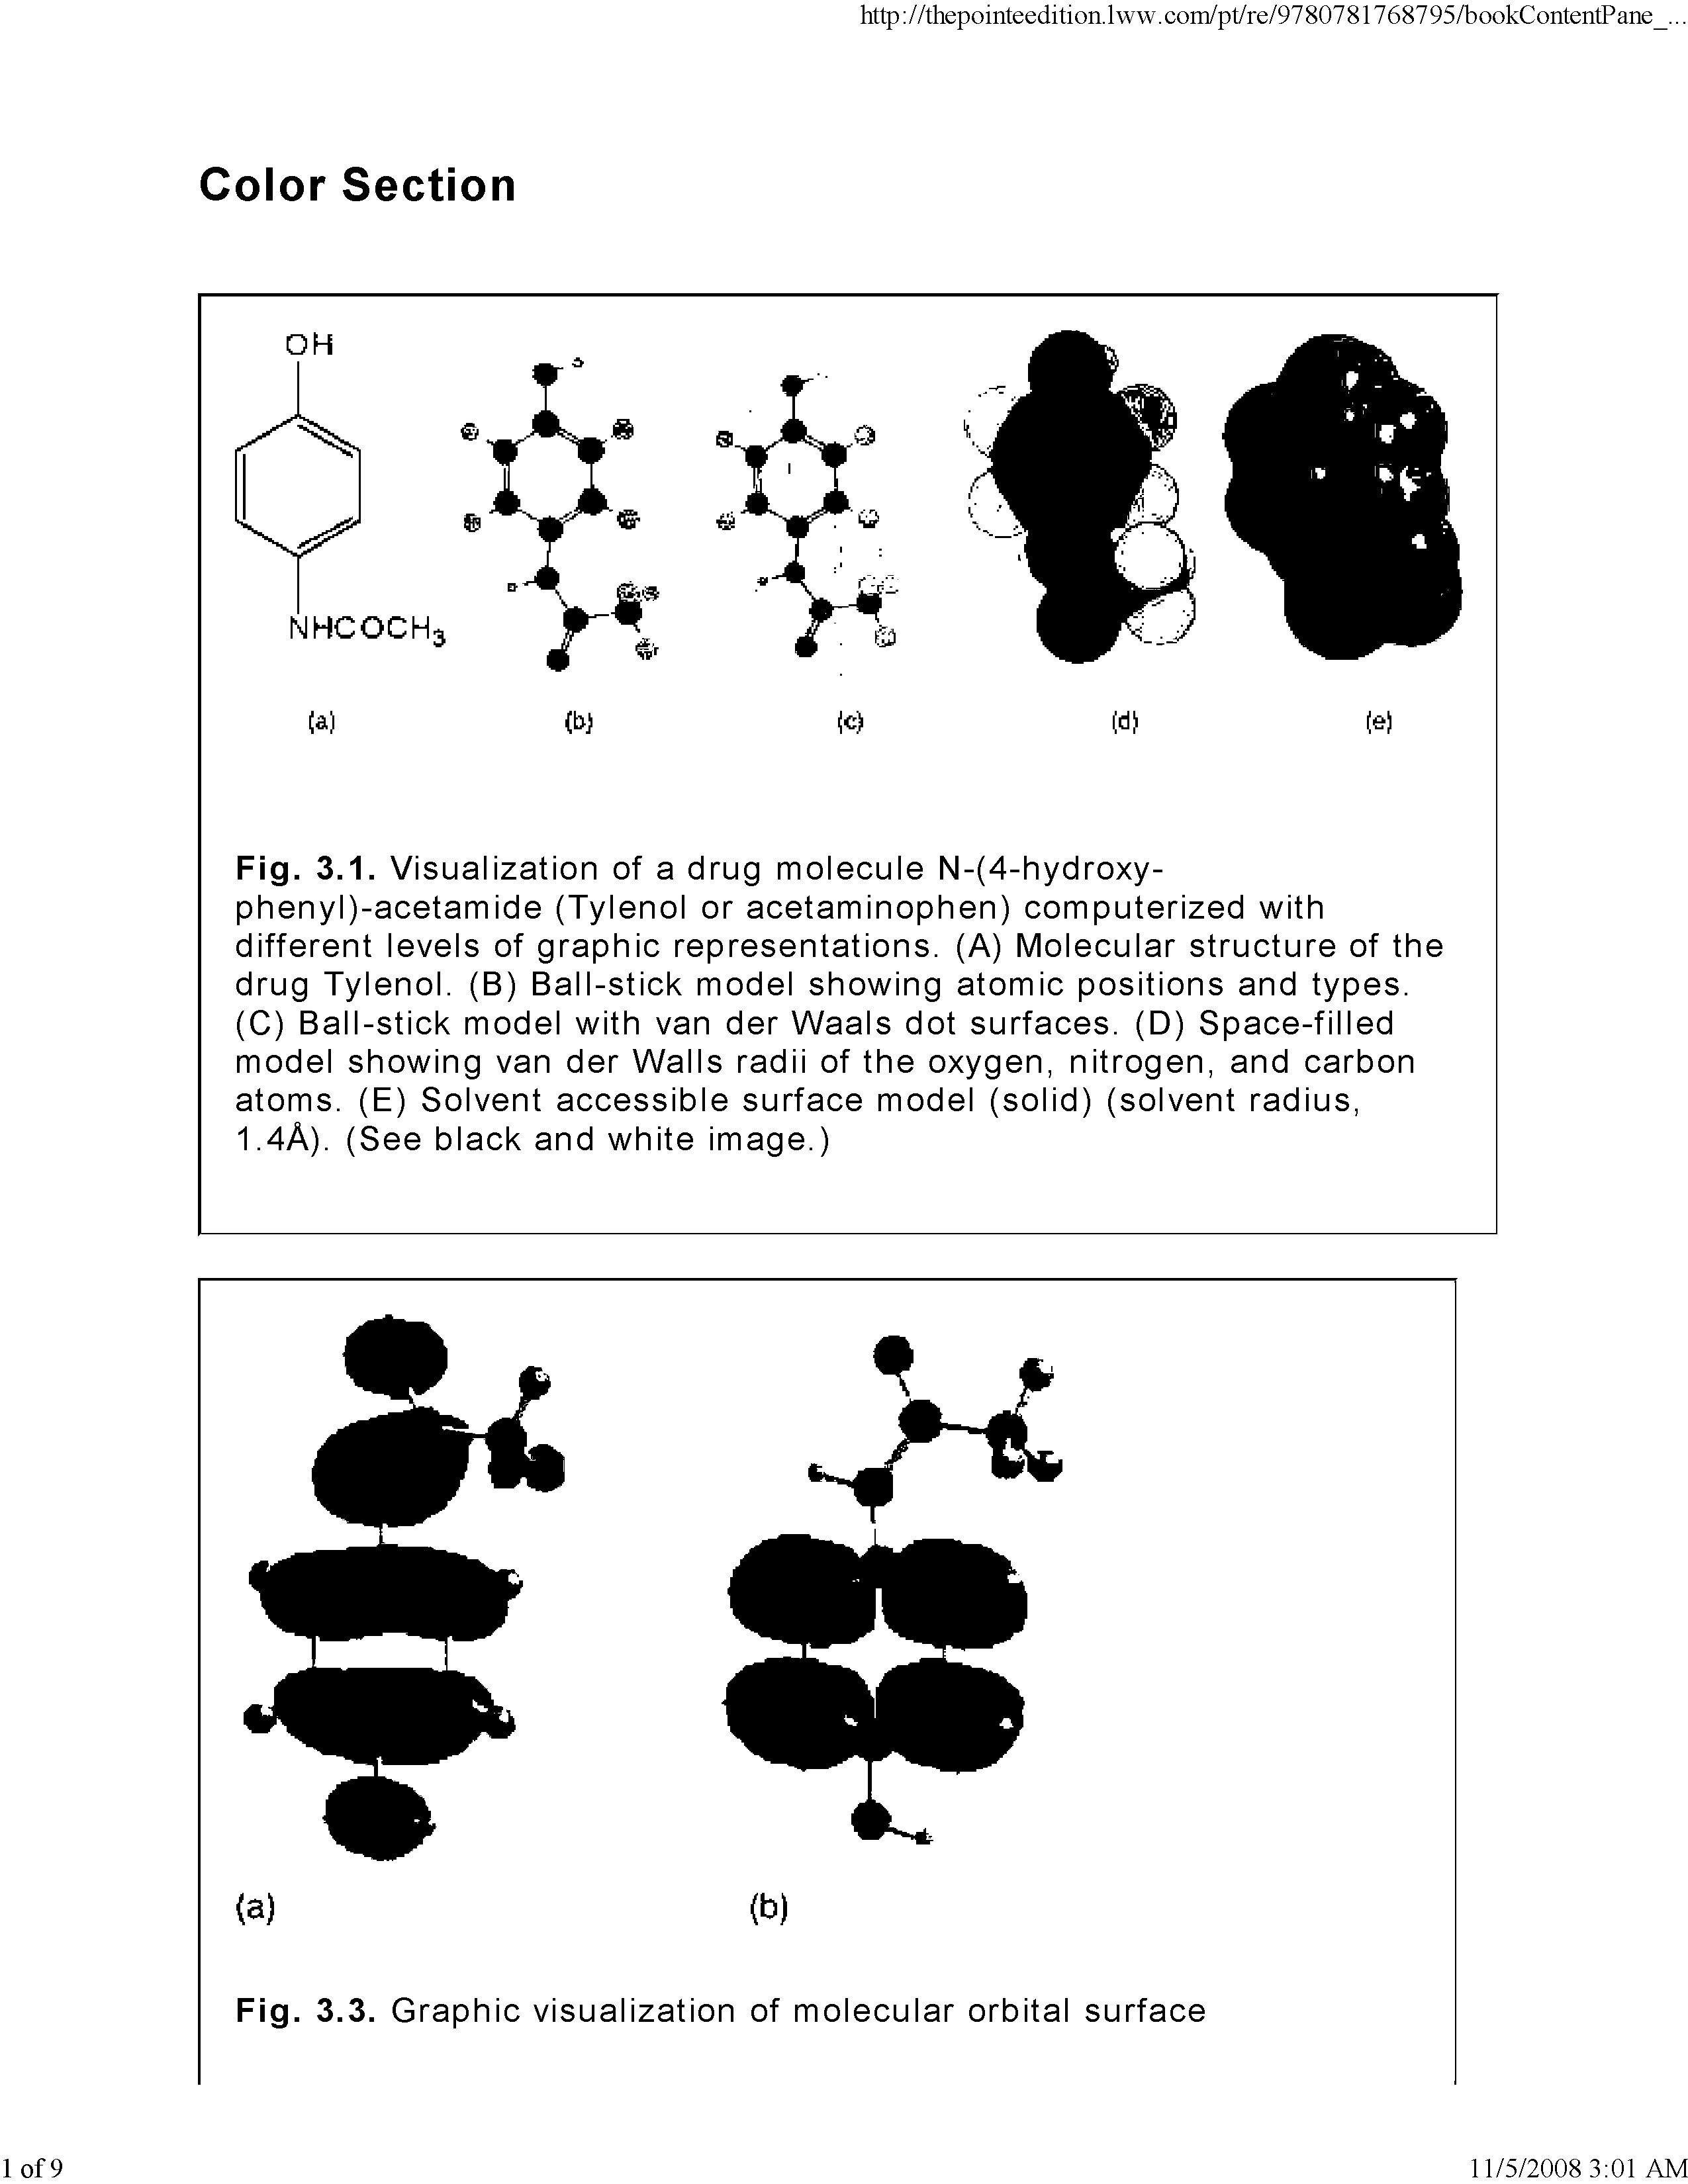 Fig. 3.1. Visualization of a drug molecule N-(4-hydroxy-phenyl)-acetamide (Tylenol or acetaminophen) computerized with different levels of graphic representations. (A) Molecular structure of the drug Tylenol. (B) Ball-stick model showing atomic positions and types. (C) Ball-stick model with van der Waals dot surfaces. (D) Space-filled model showing van der Walls radii of the oxygen, nitrogen, and carbon atoms. (E) Solvent accessible surface model (solid) (solvent radius, 1.4A). (See black and white image.)...